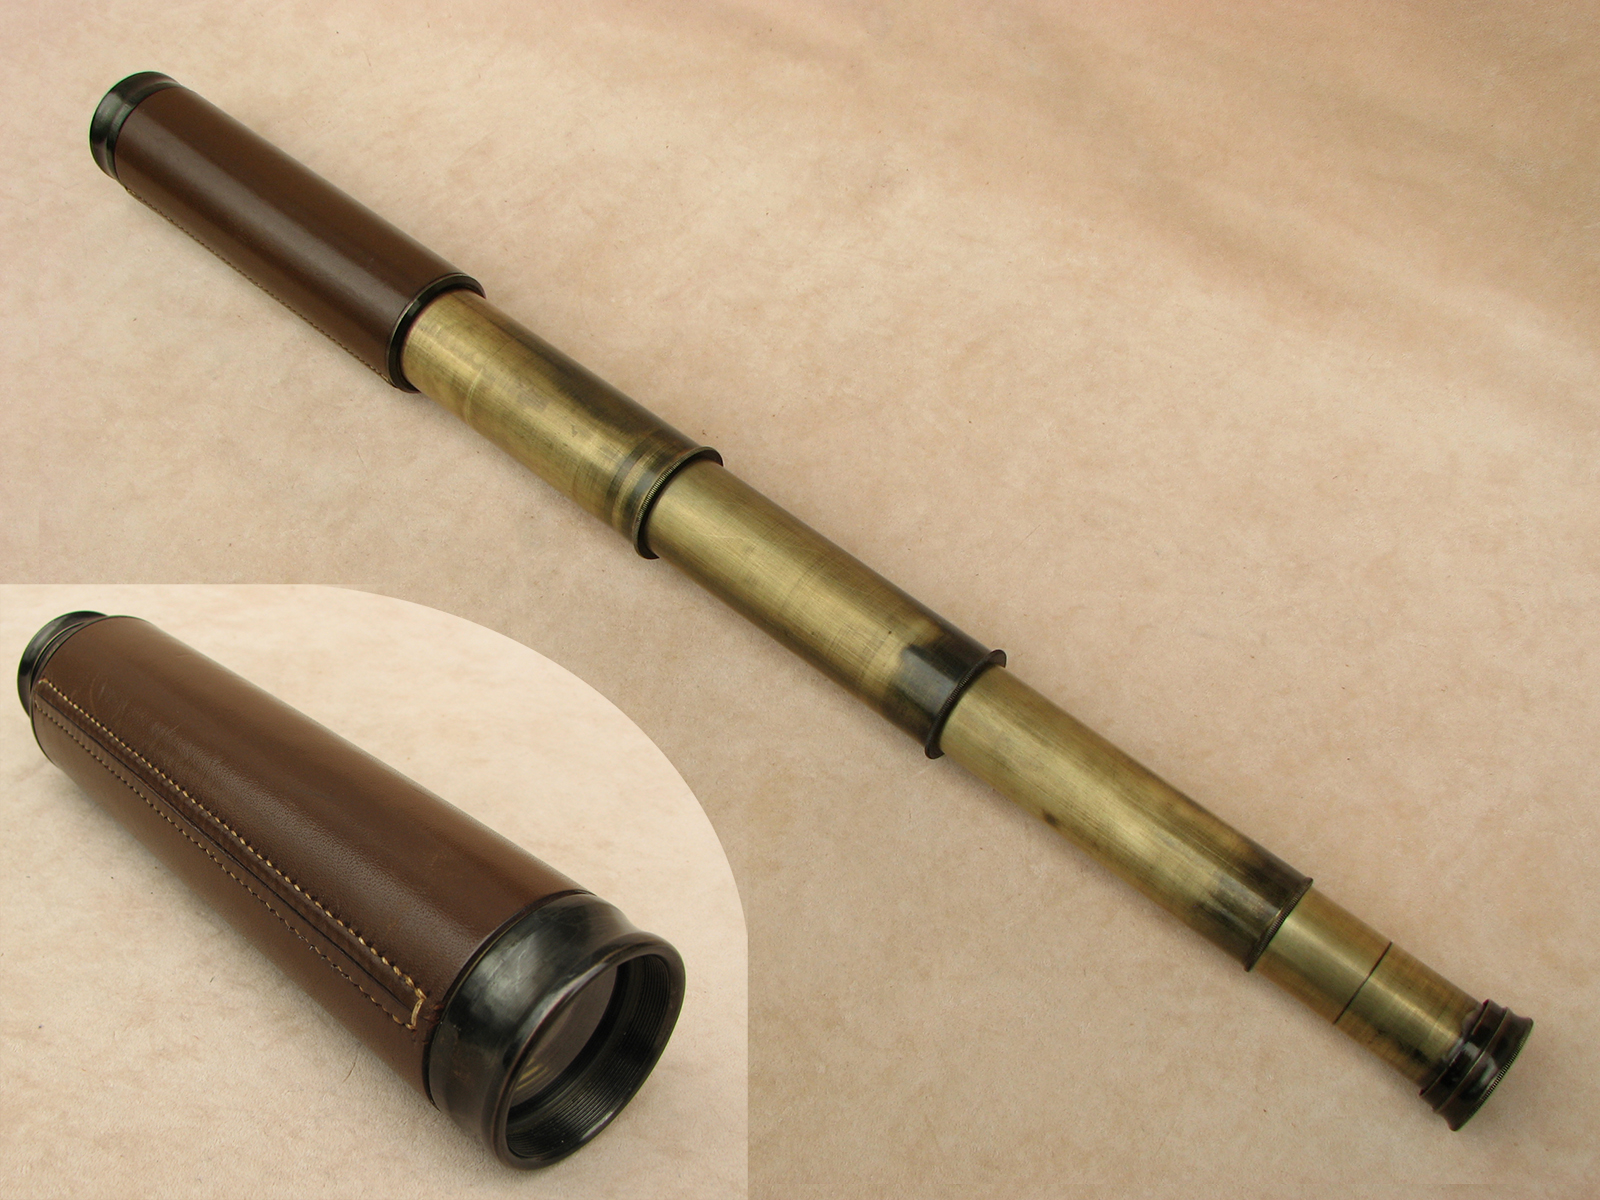 3 draw leather clad pocket telescope with pancratic tube to 20x magnification.